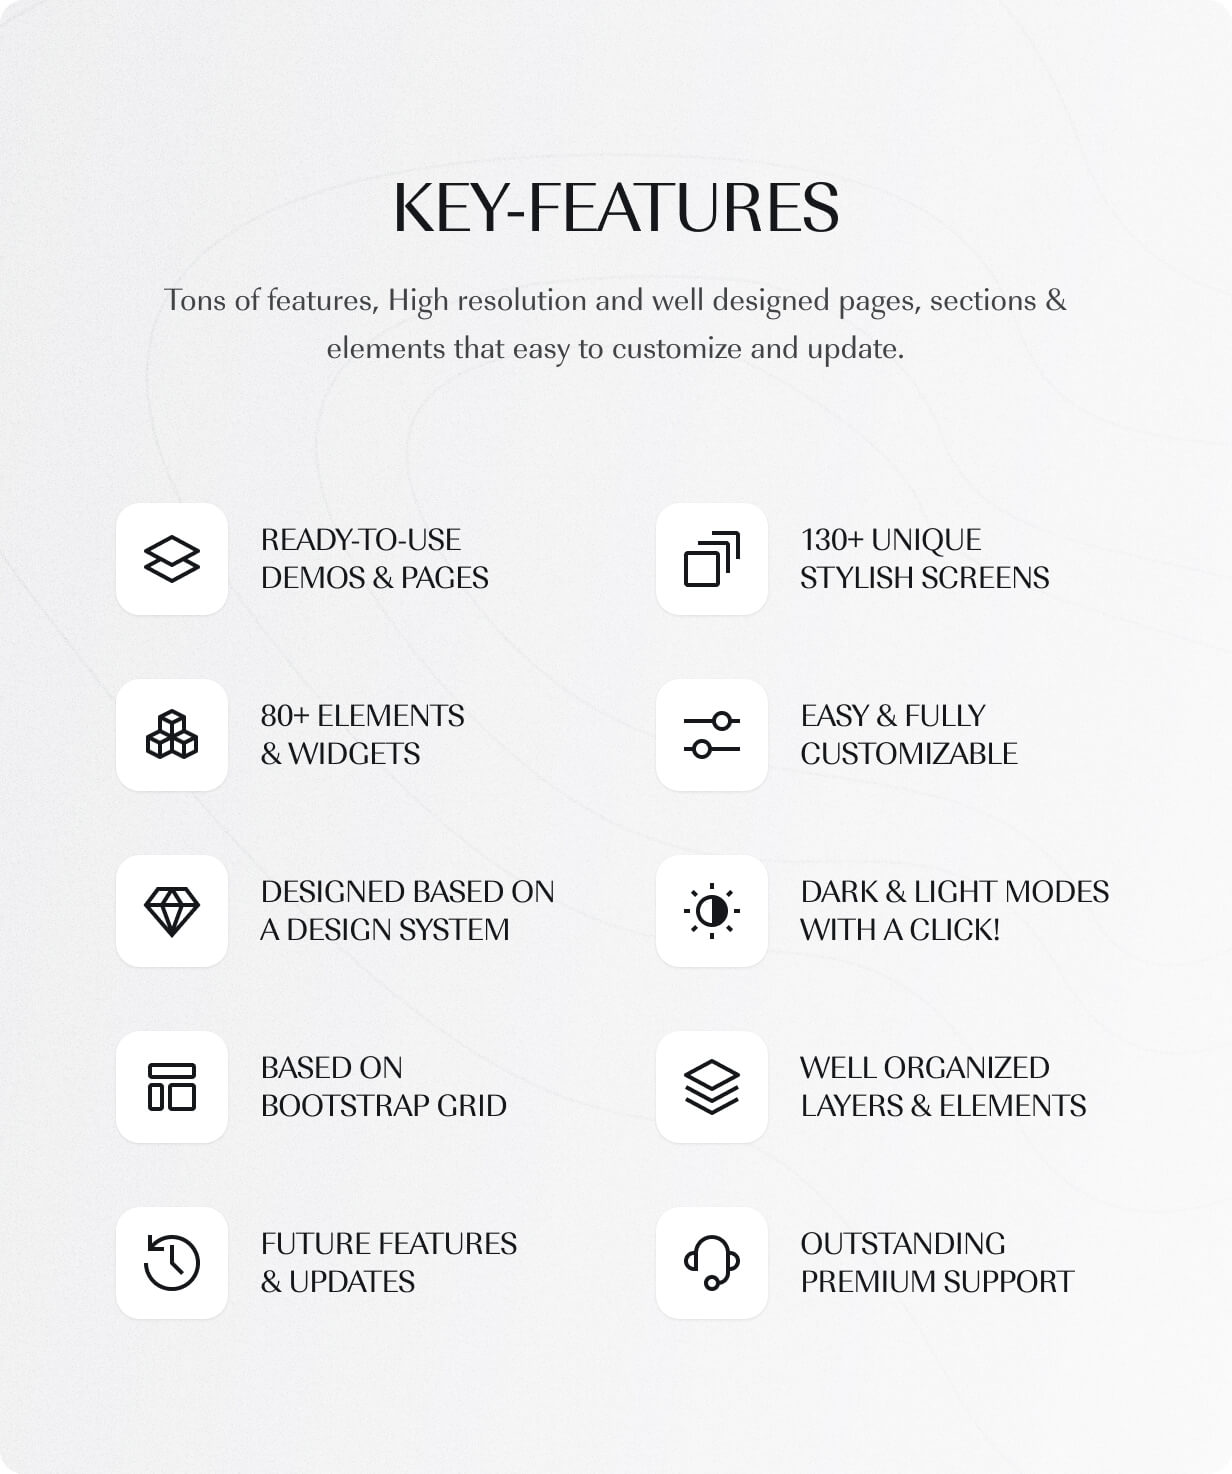 Stelary - Key features